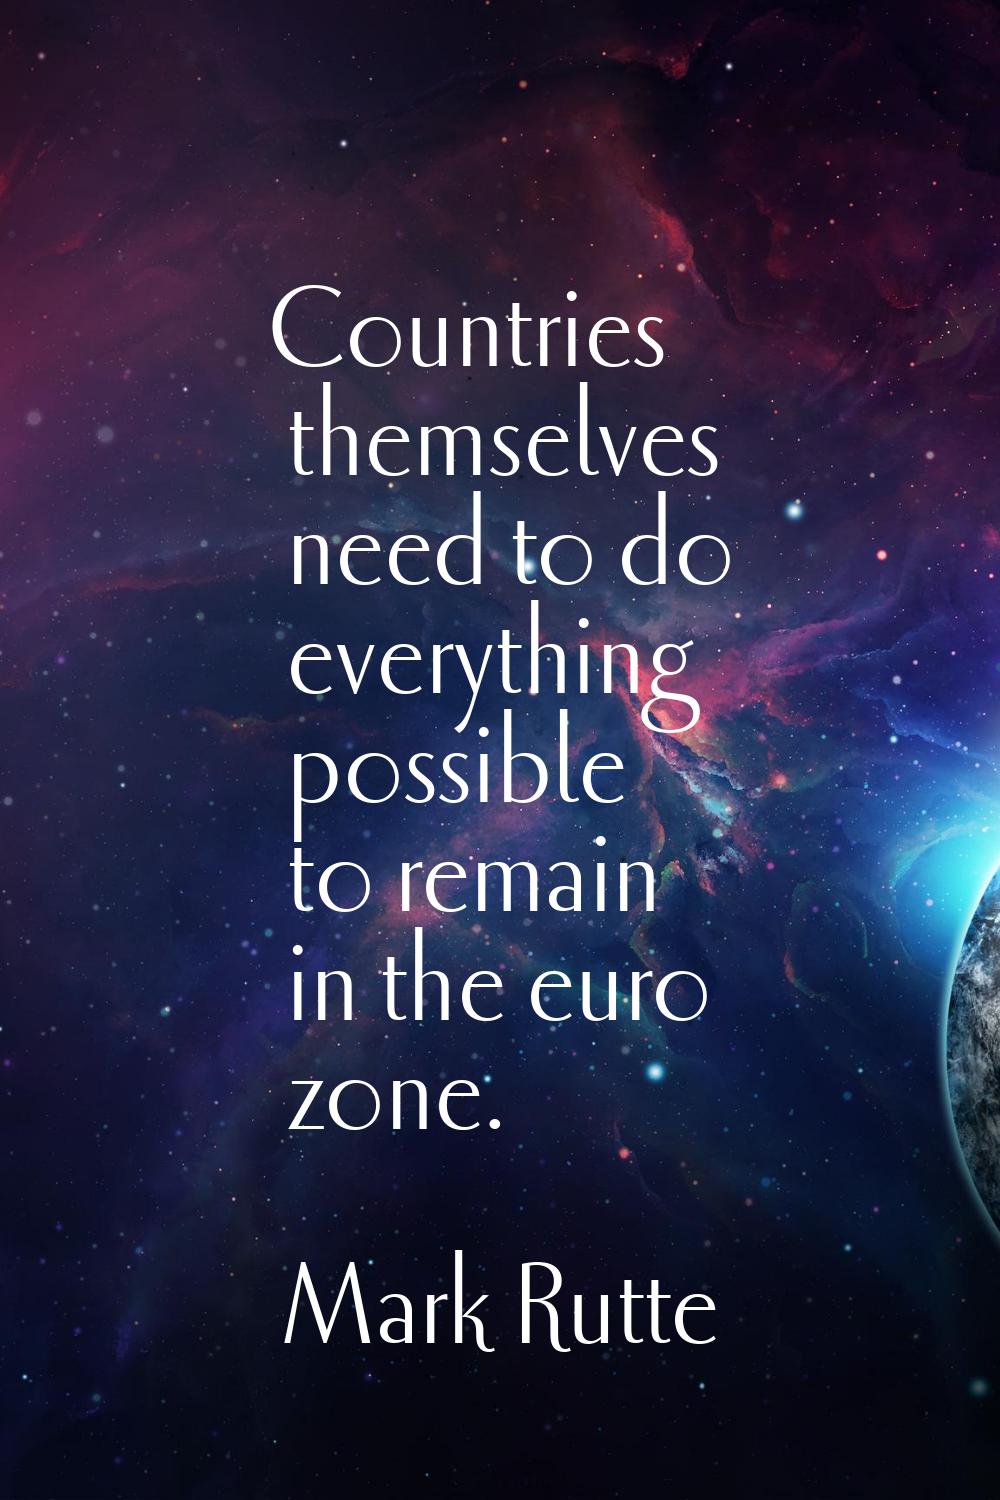 Countries themselves need to do everything possible to remain in the euro zone.